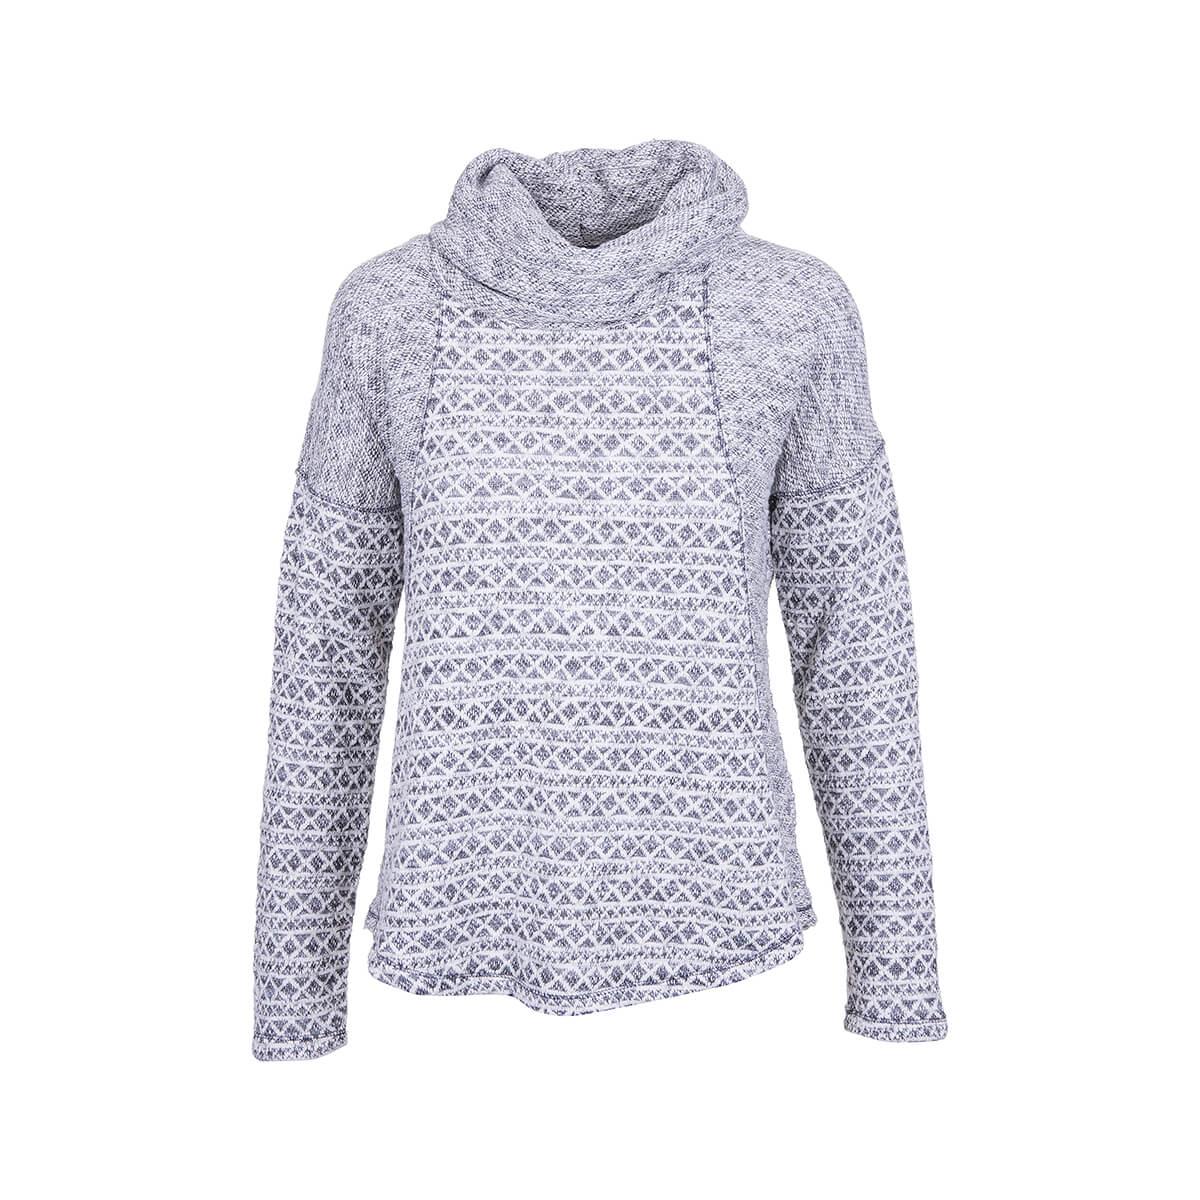 NORTH RIVER | Women's Jacquard Pieced Cowl Neck Sweater